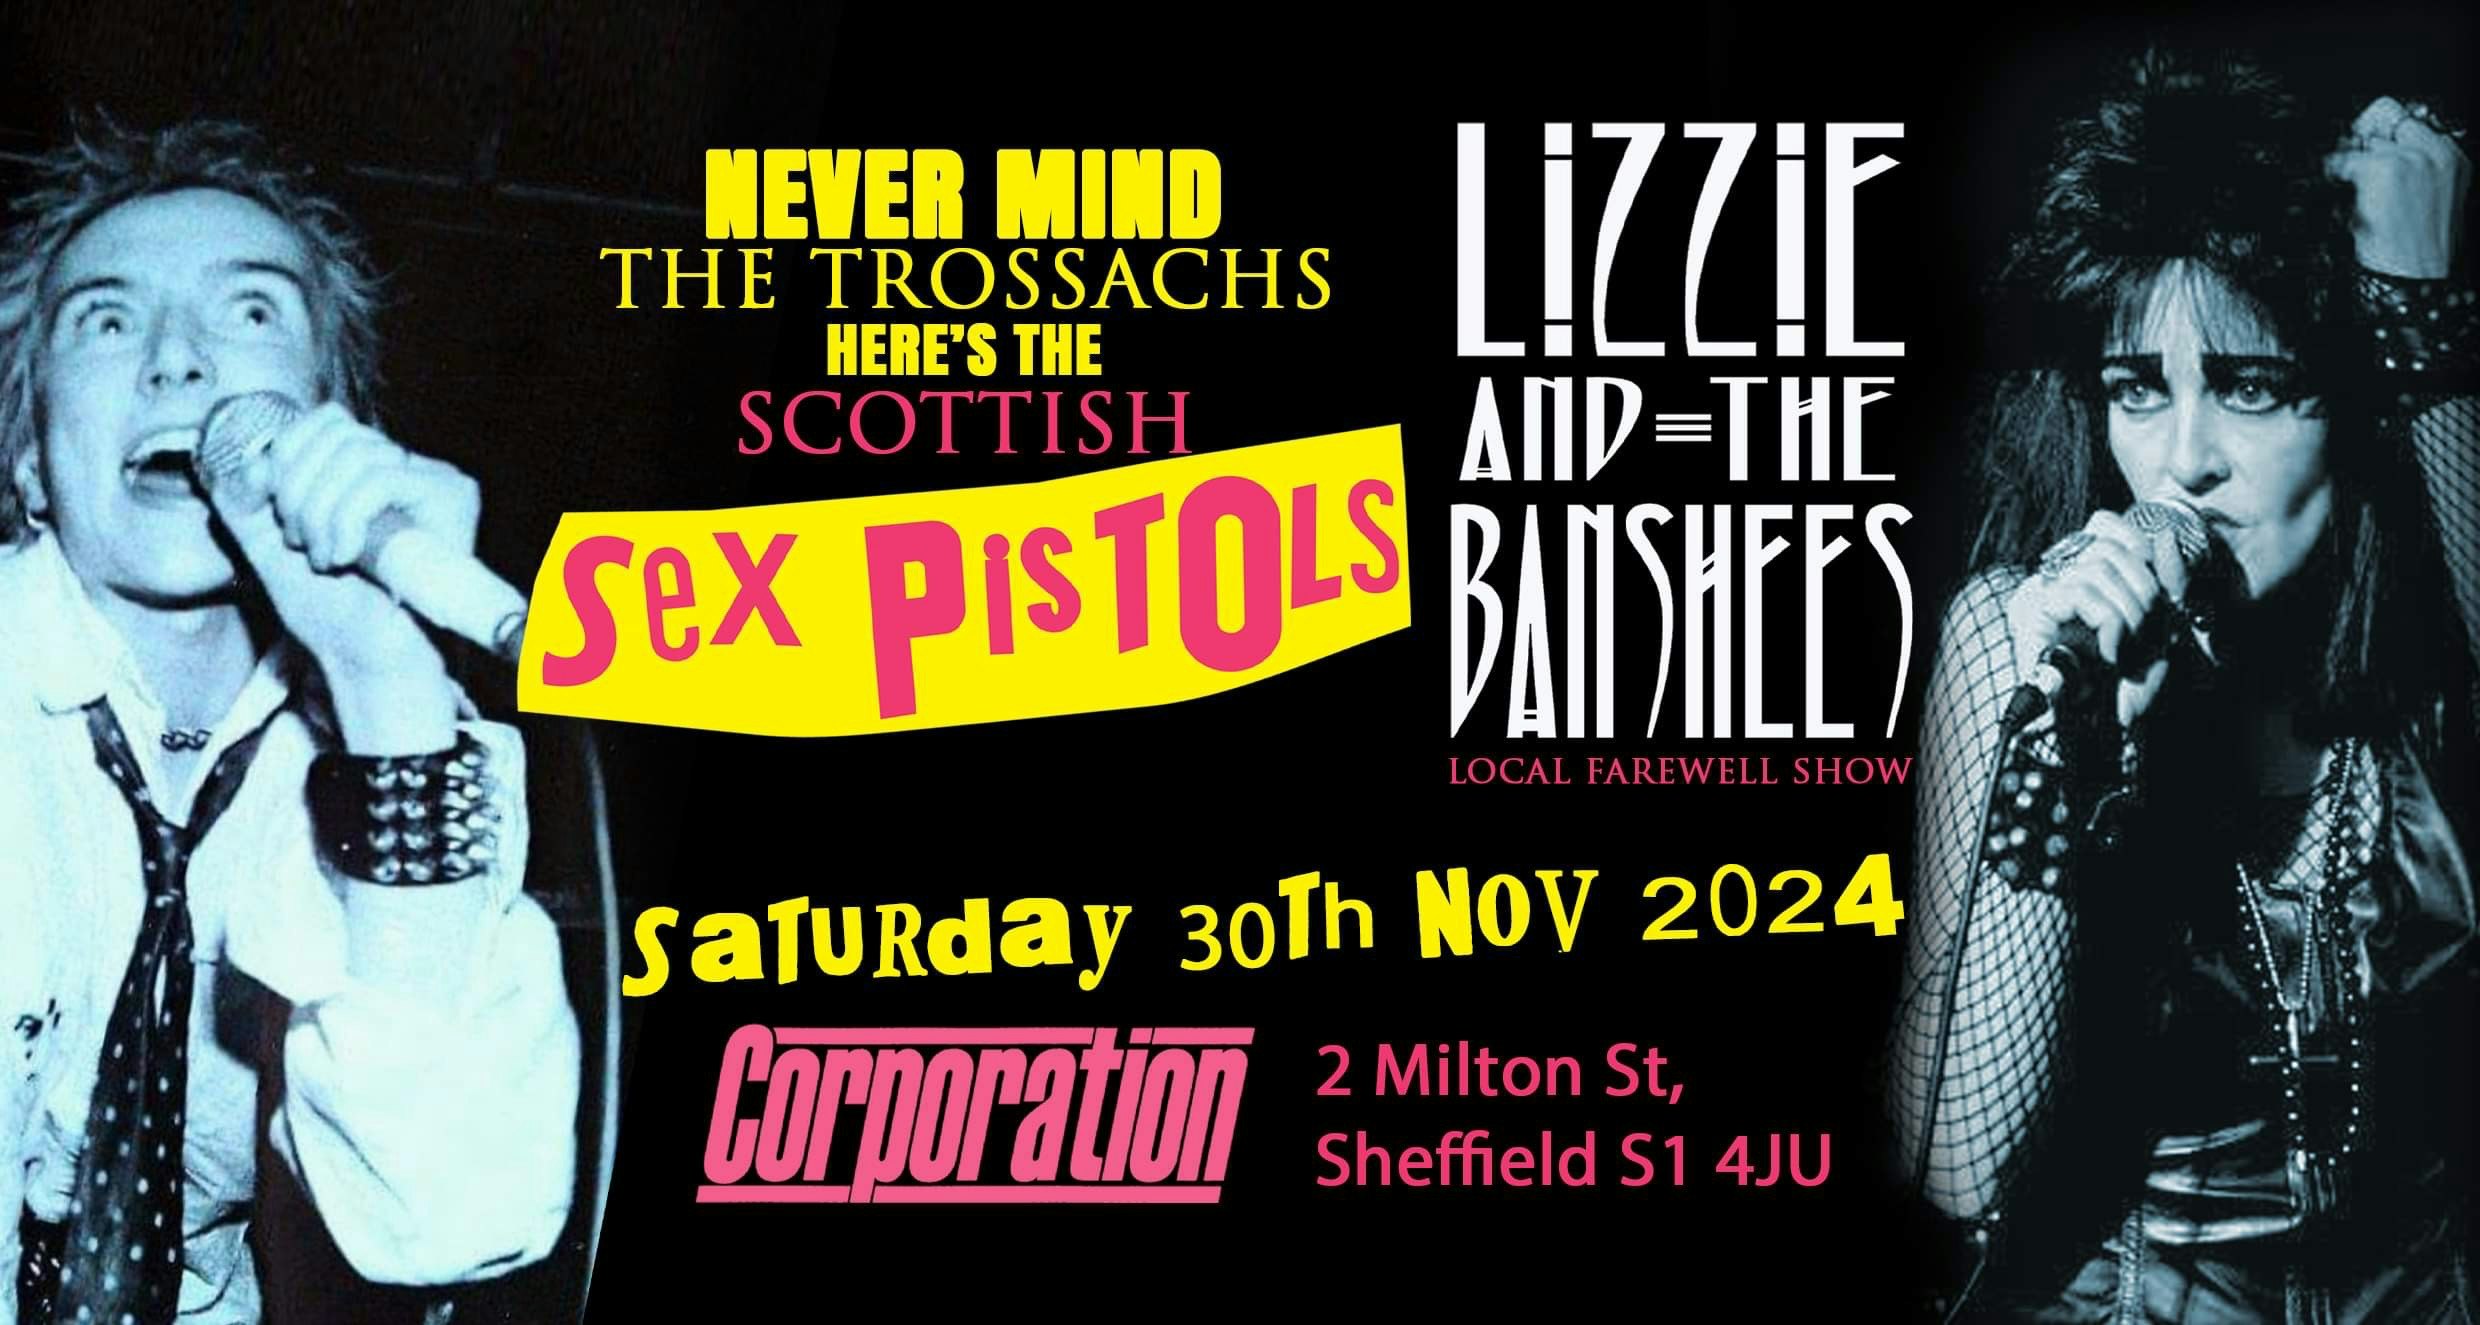 THE SCOTTISH SEX PISTOLS + LIZZIE AND THE BANSHEES